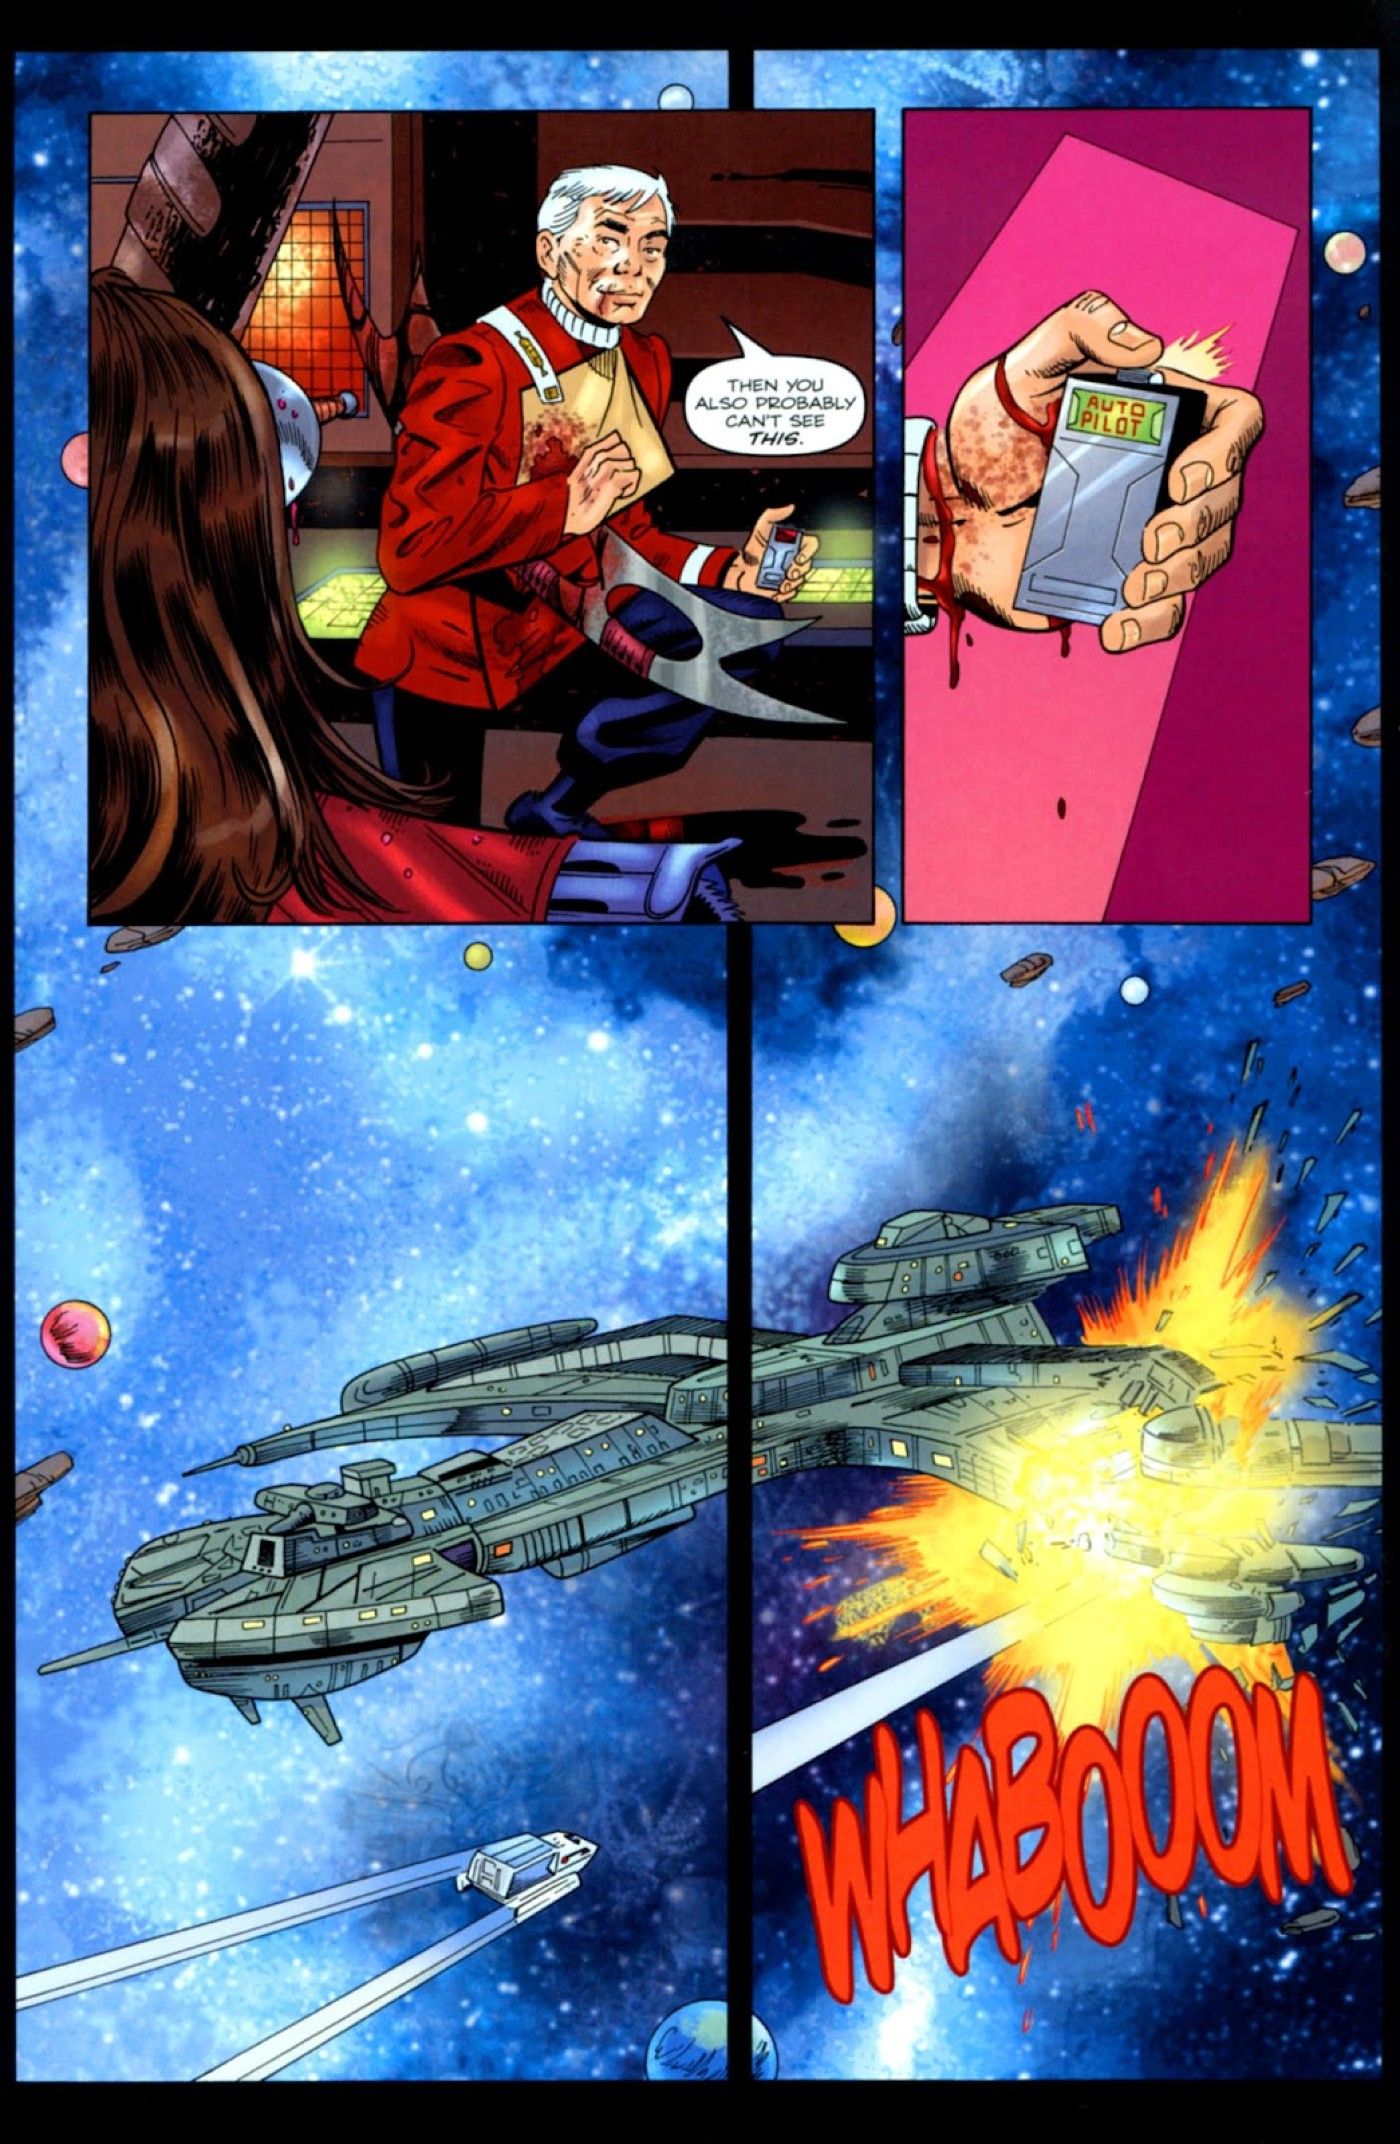 Four panels of Sulu setting his shuttle on auto-pilot, ramming it in to an alternate timeline Worf's ship.